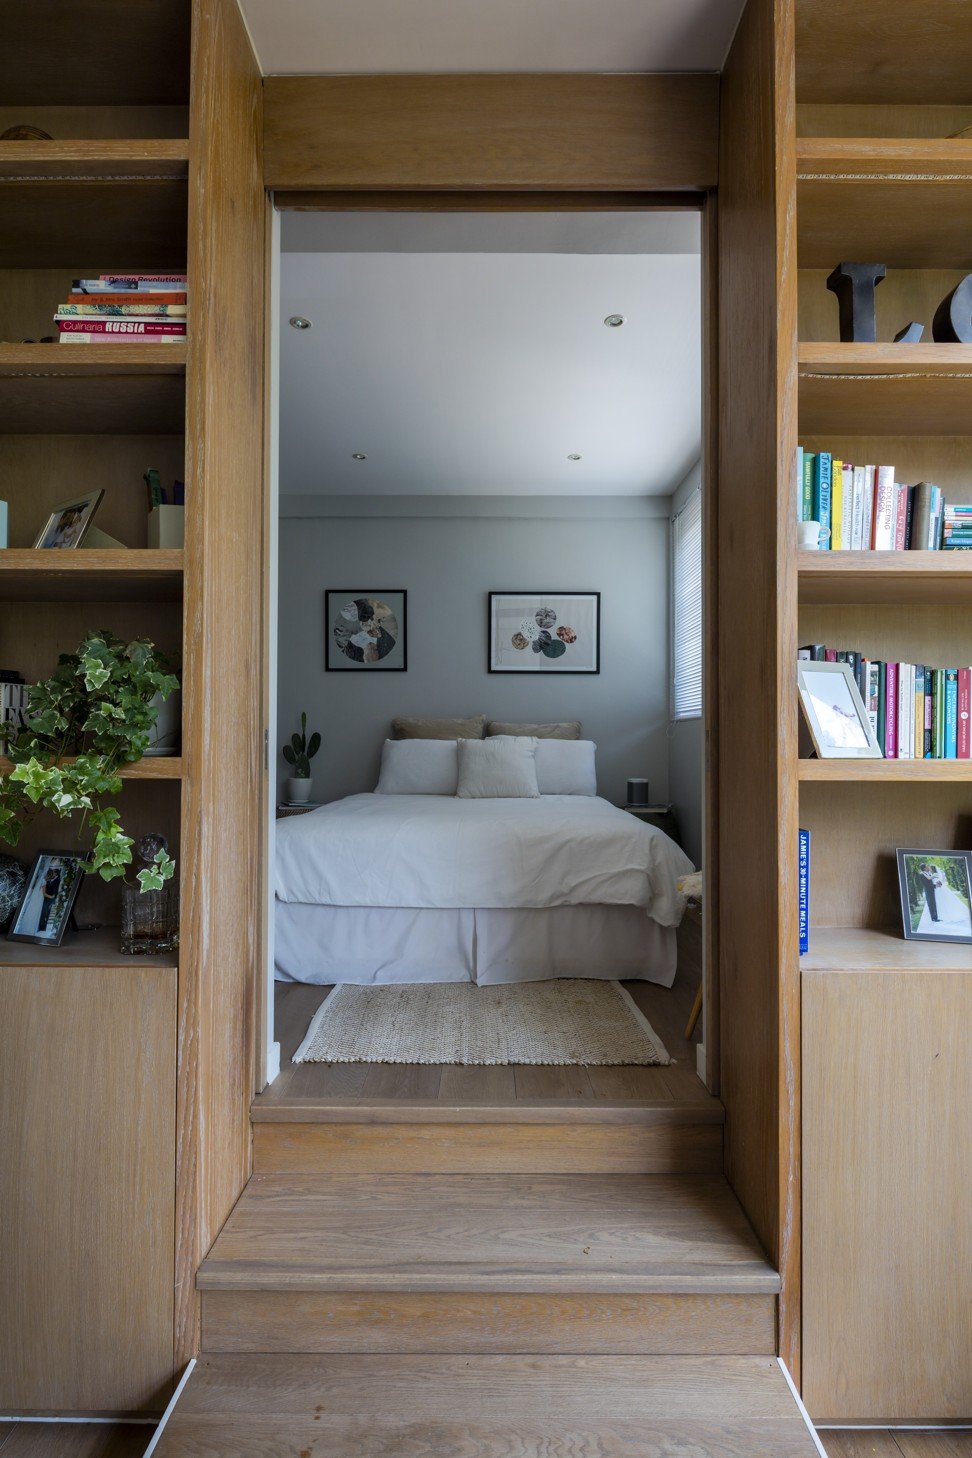 A spare bedroom in the Reinerts’ Lantau home.